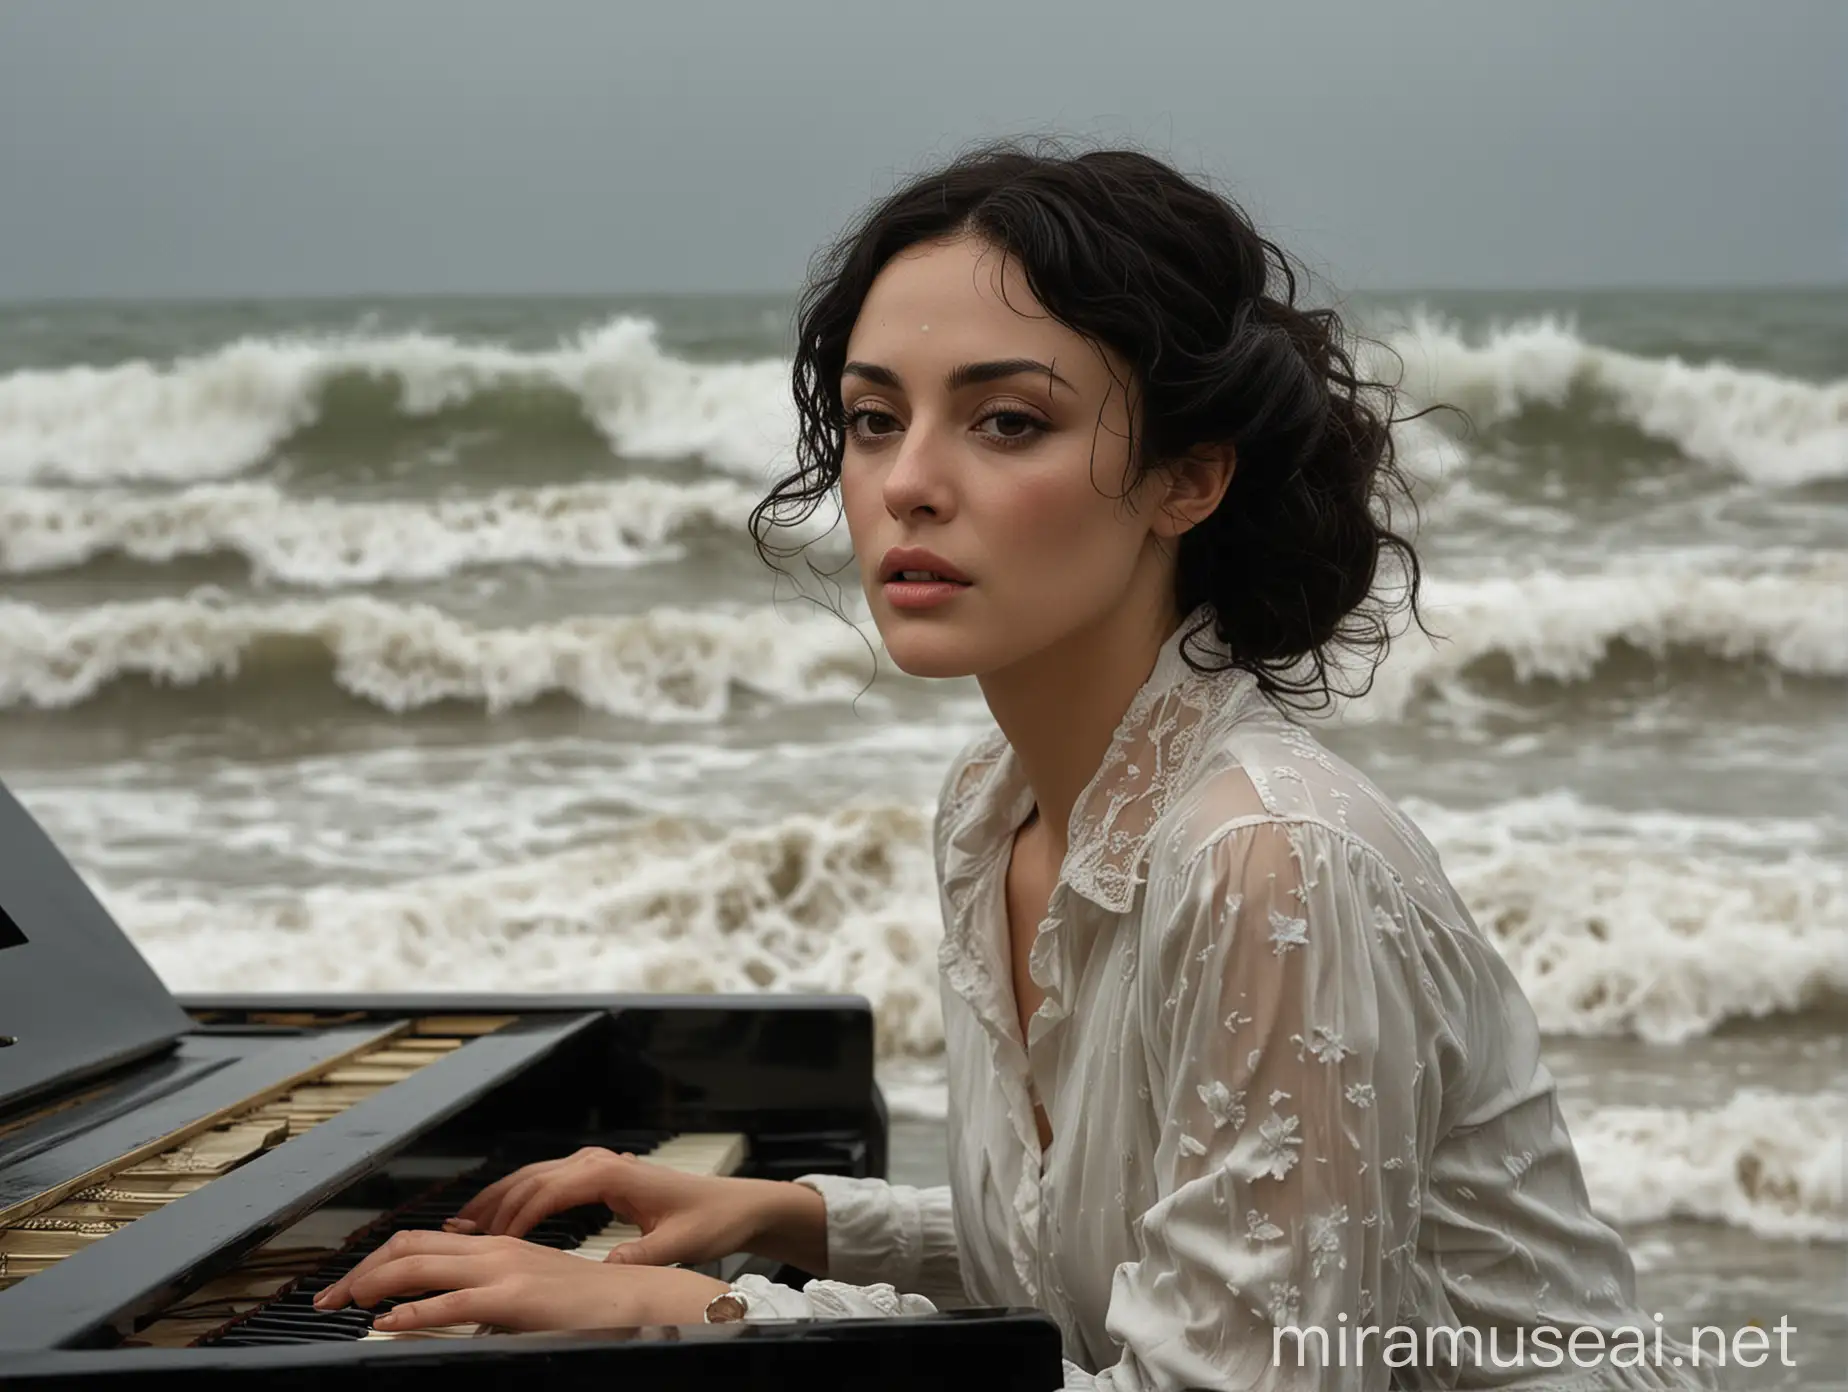 Deva Cassel who is Monica Bellucci's daughter, with Twiggy's makeup leaned on the piano on the sea shore, the weather is cloudy, there are waves in the sea